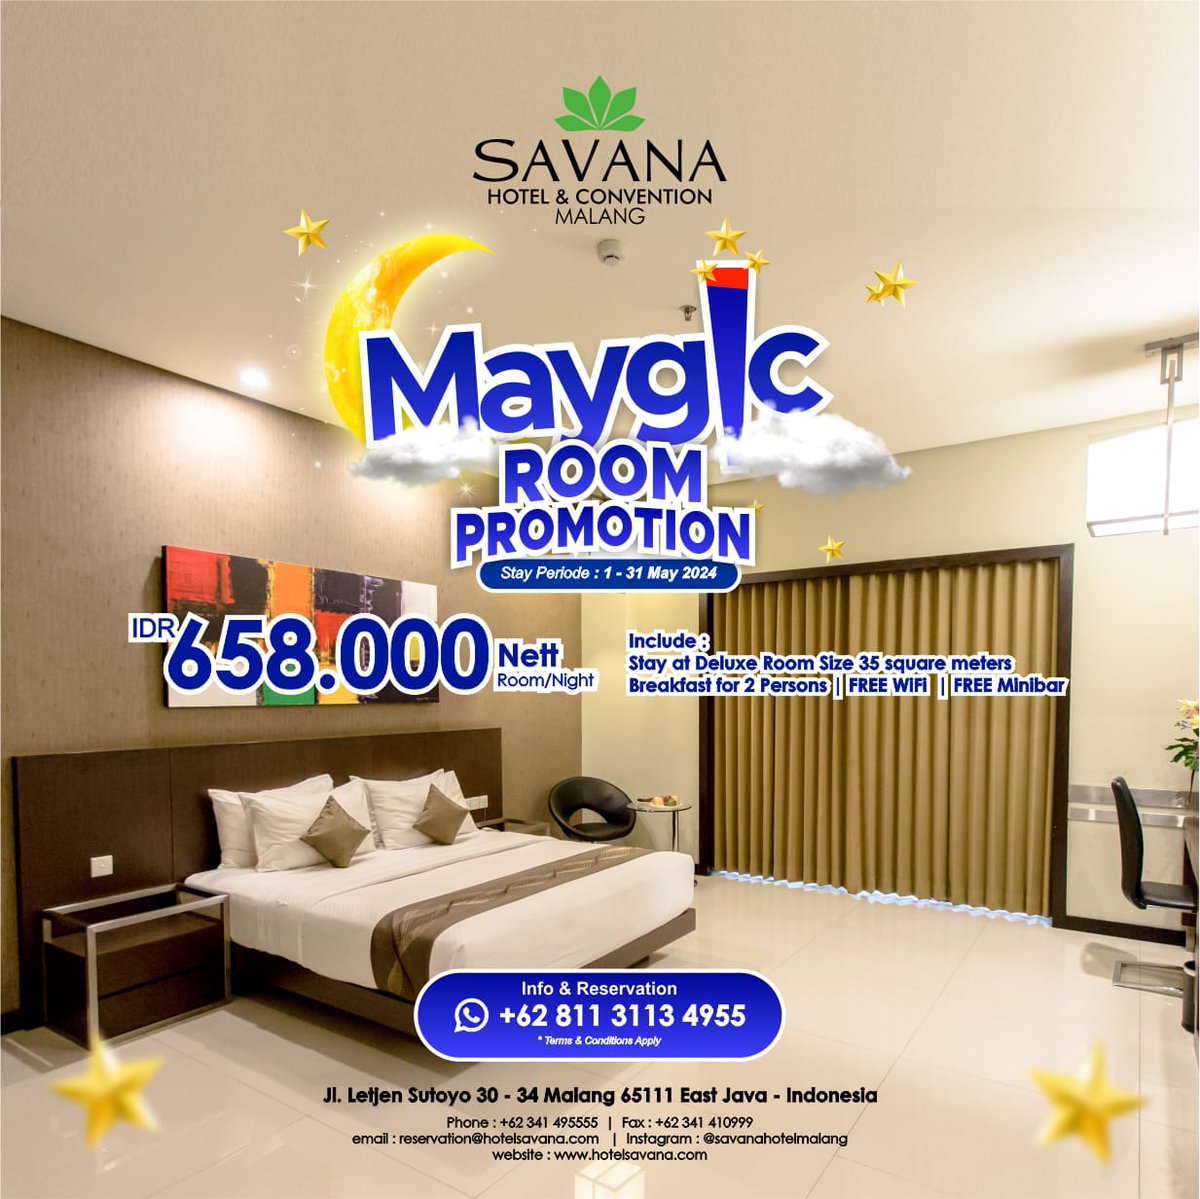 Make your May feel special with Maygic Room Promotion.

IDR 658.000,- Nett/Room/Night.
Include: Stay at Deluxe Room | Breakfast for 2 persons | Free Wifi | Free Minibar.

Info & Reservation
☎️(0341) 495555
📱0811-3113-4955

#MayDay2024 #promotwt #hotelroom #hotellife #Malang